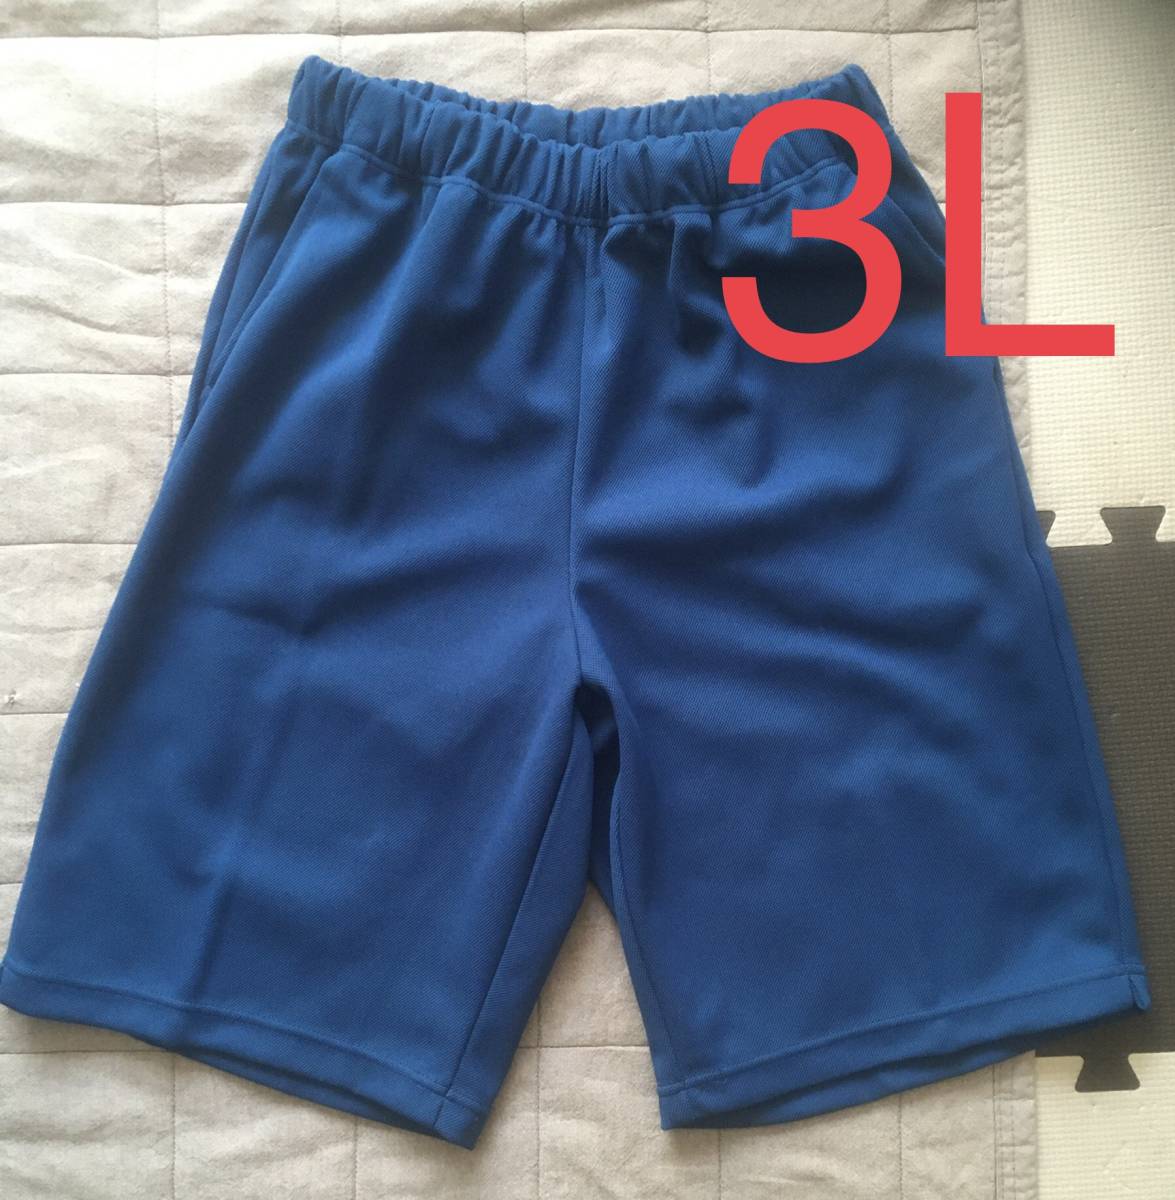  unused gym uniform shorts 3L large size made in Japan school jersey school jersey physical training put on school designation short punt re bread 